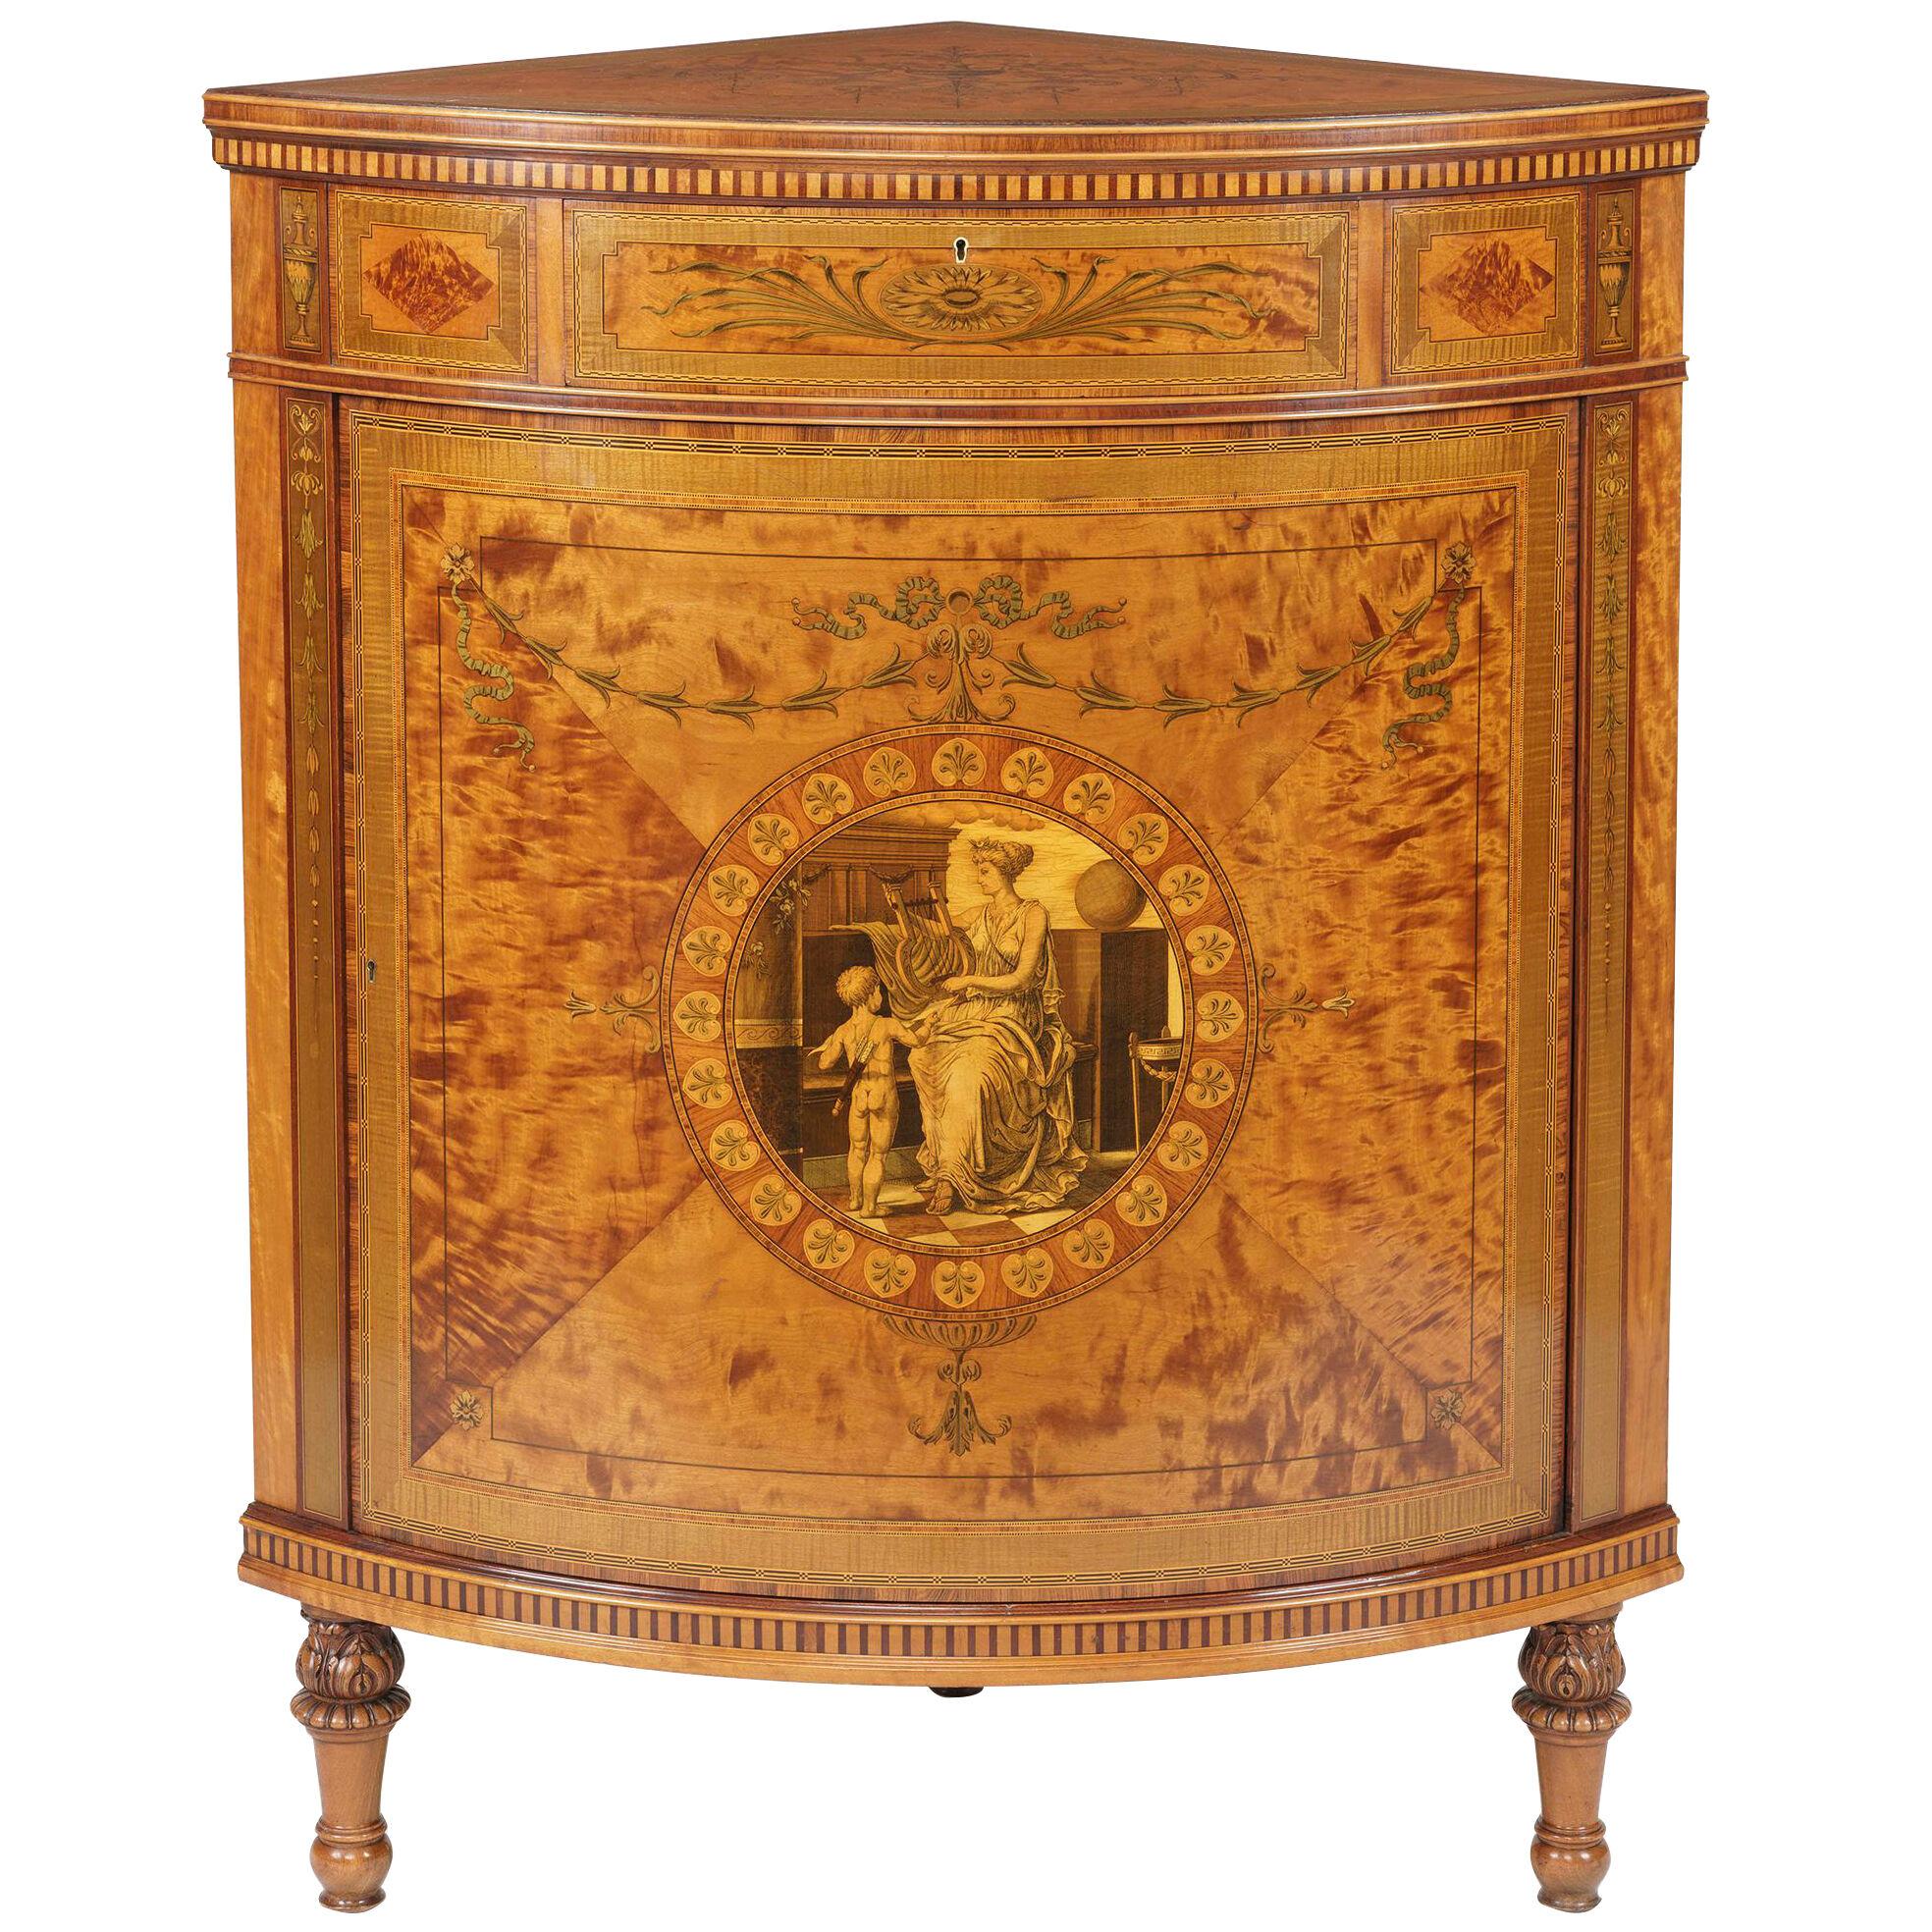 Neoclassical Corner Cabinet of the Neo-Classical Revival Period